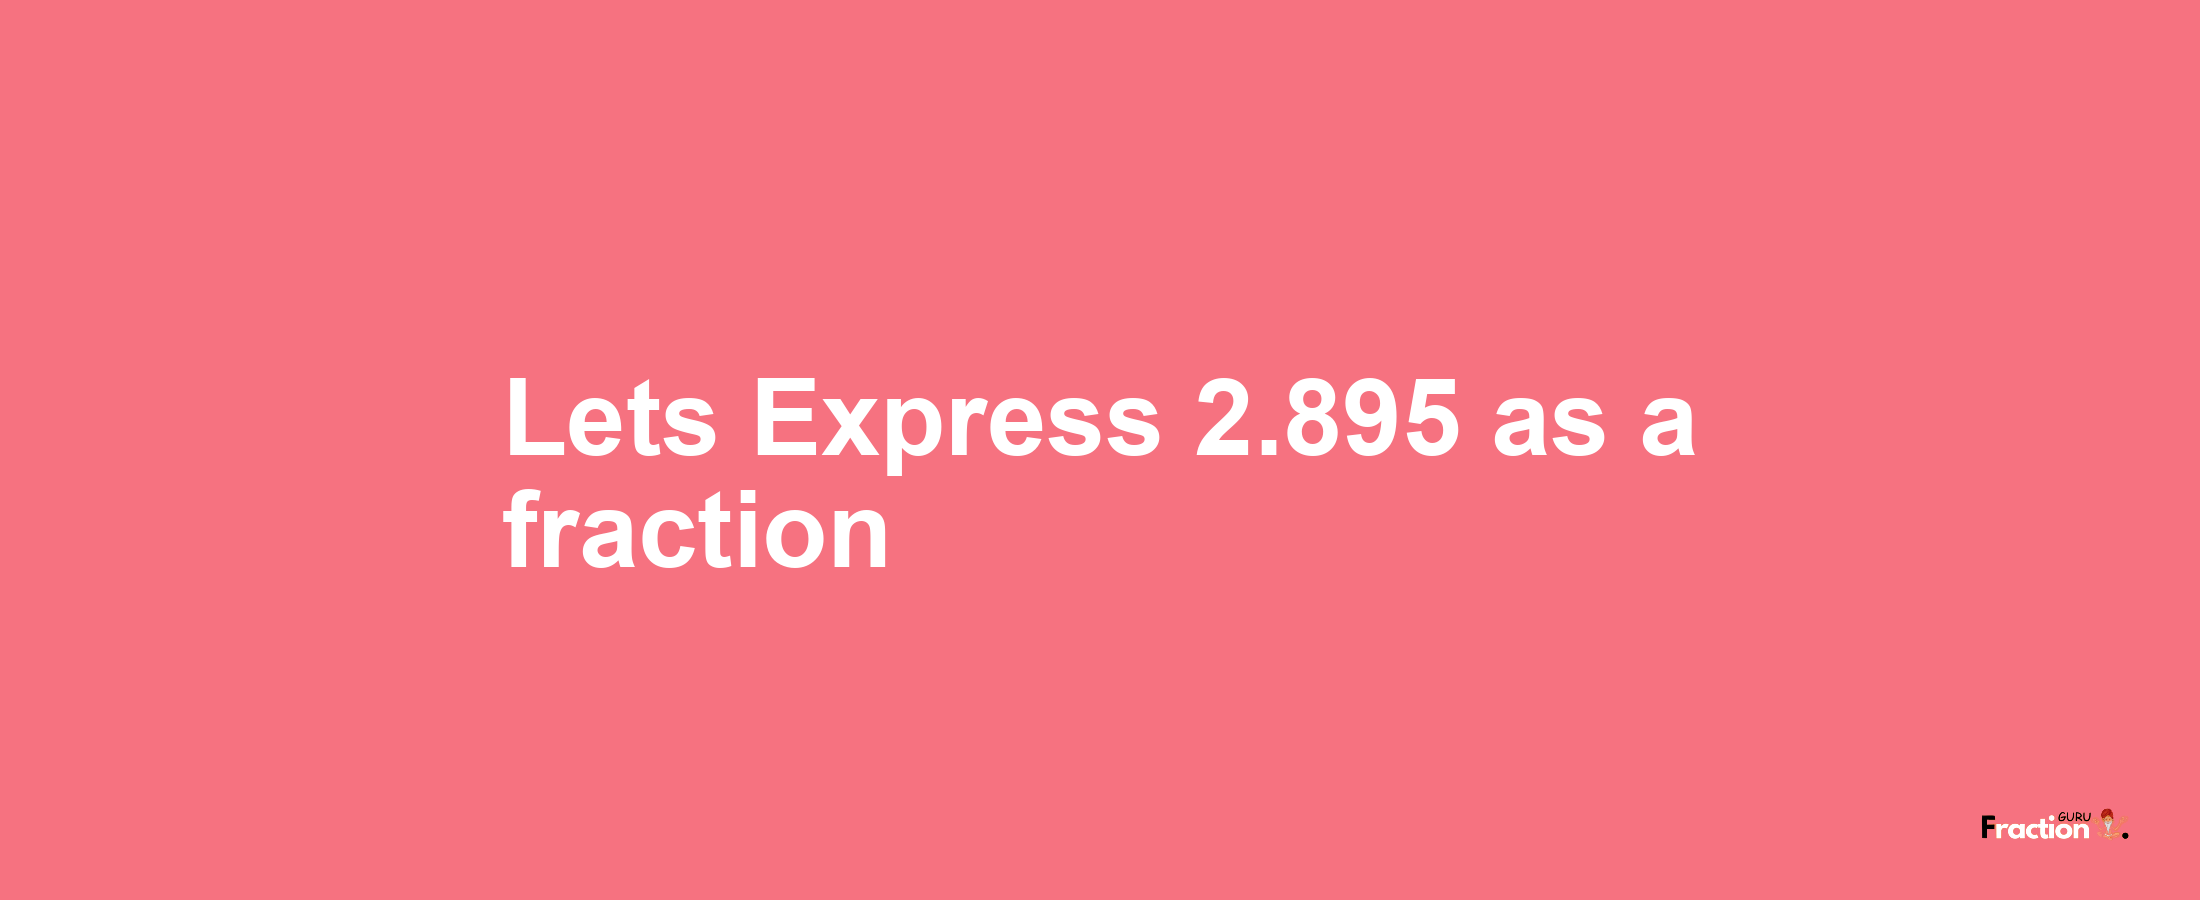 Lets Express 2.895 as afraction